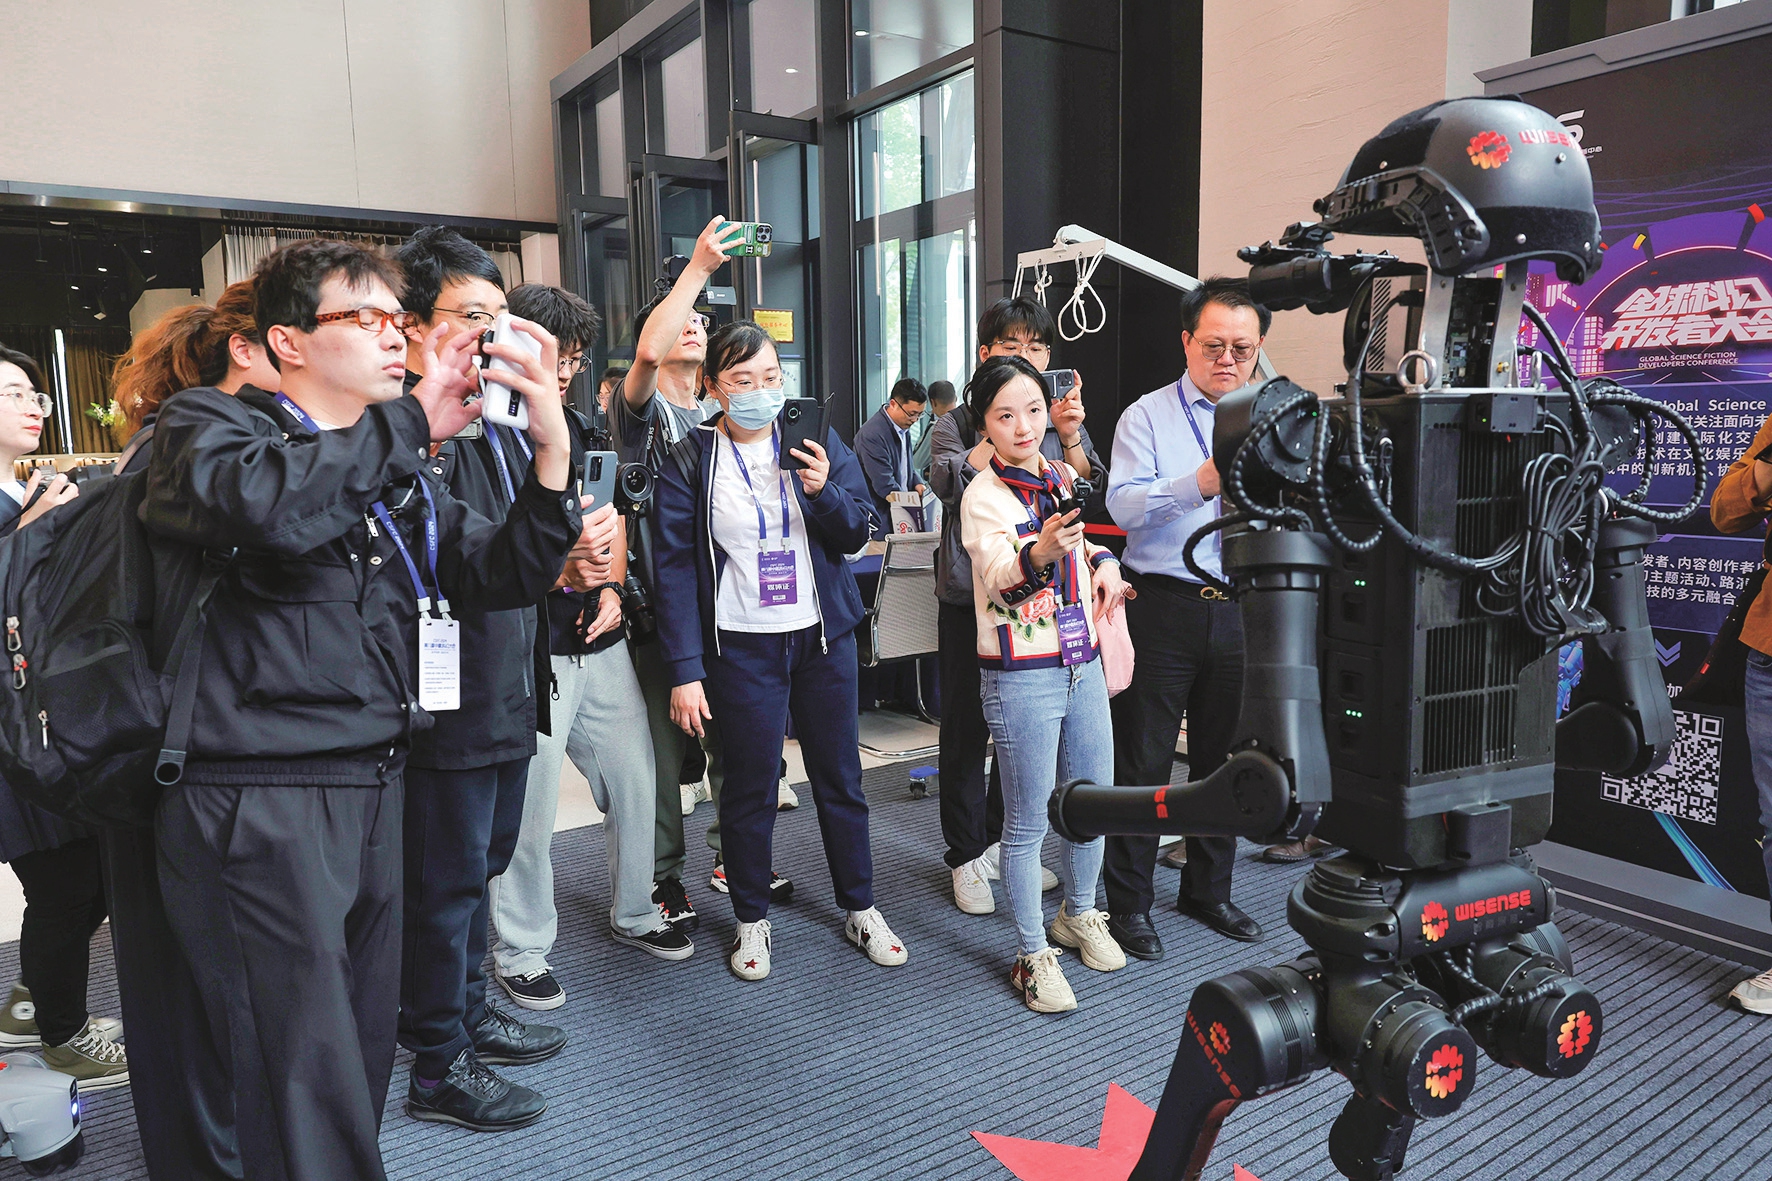 China's sci-fi industry achieves historic growth